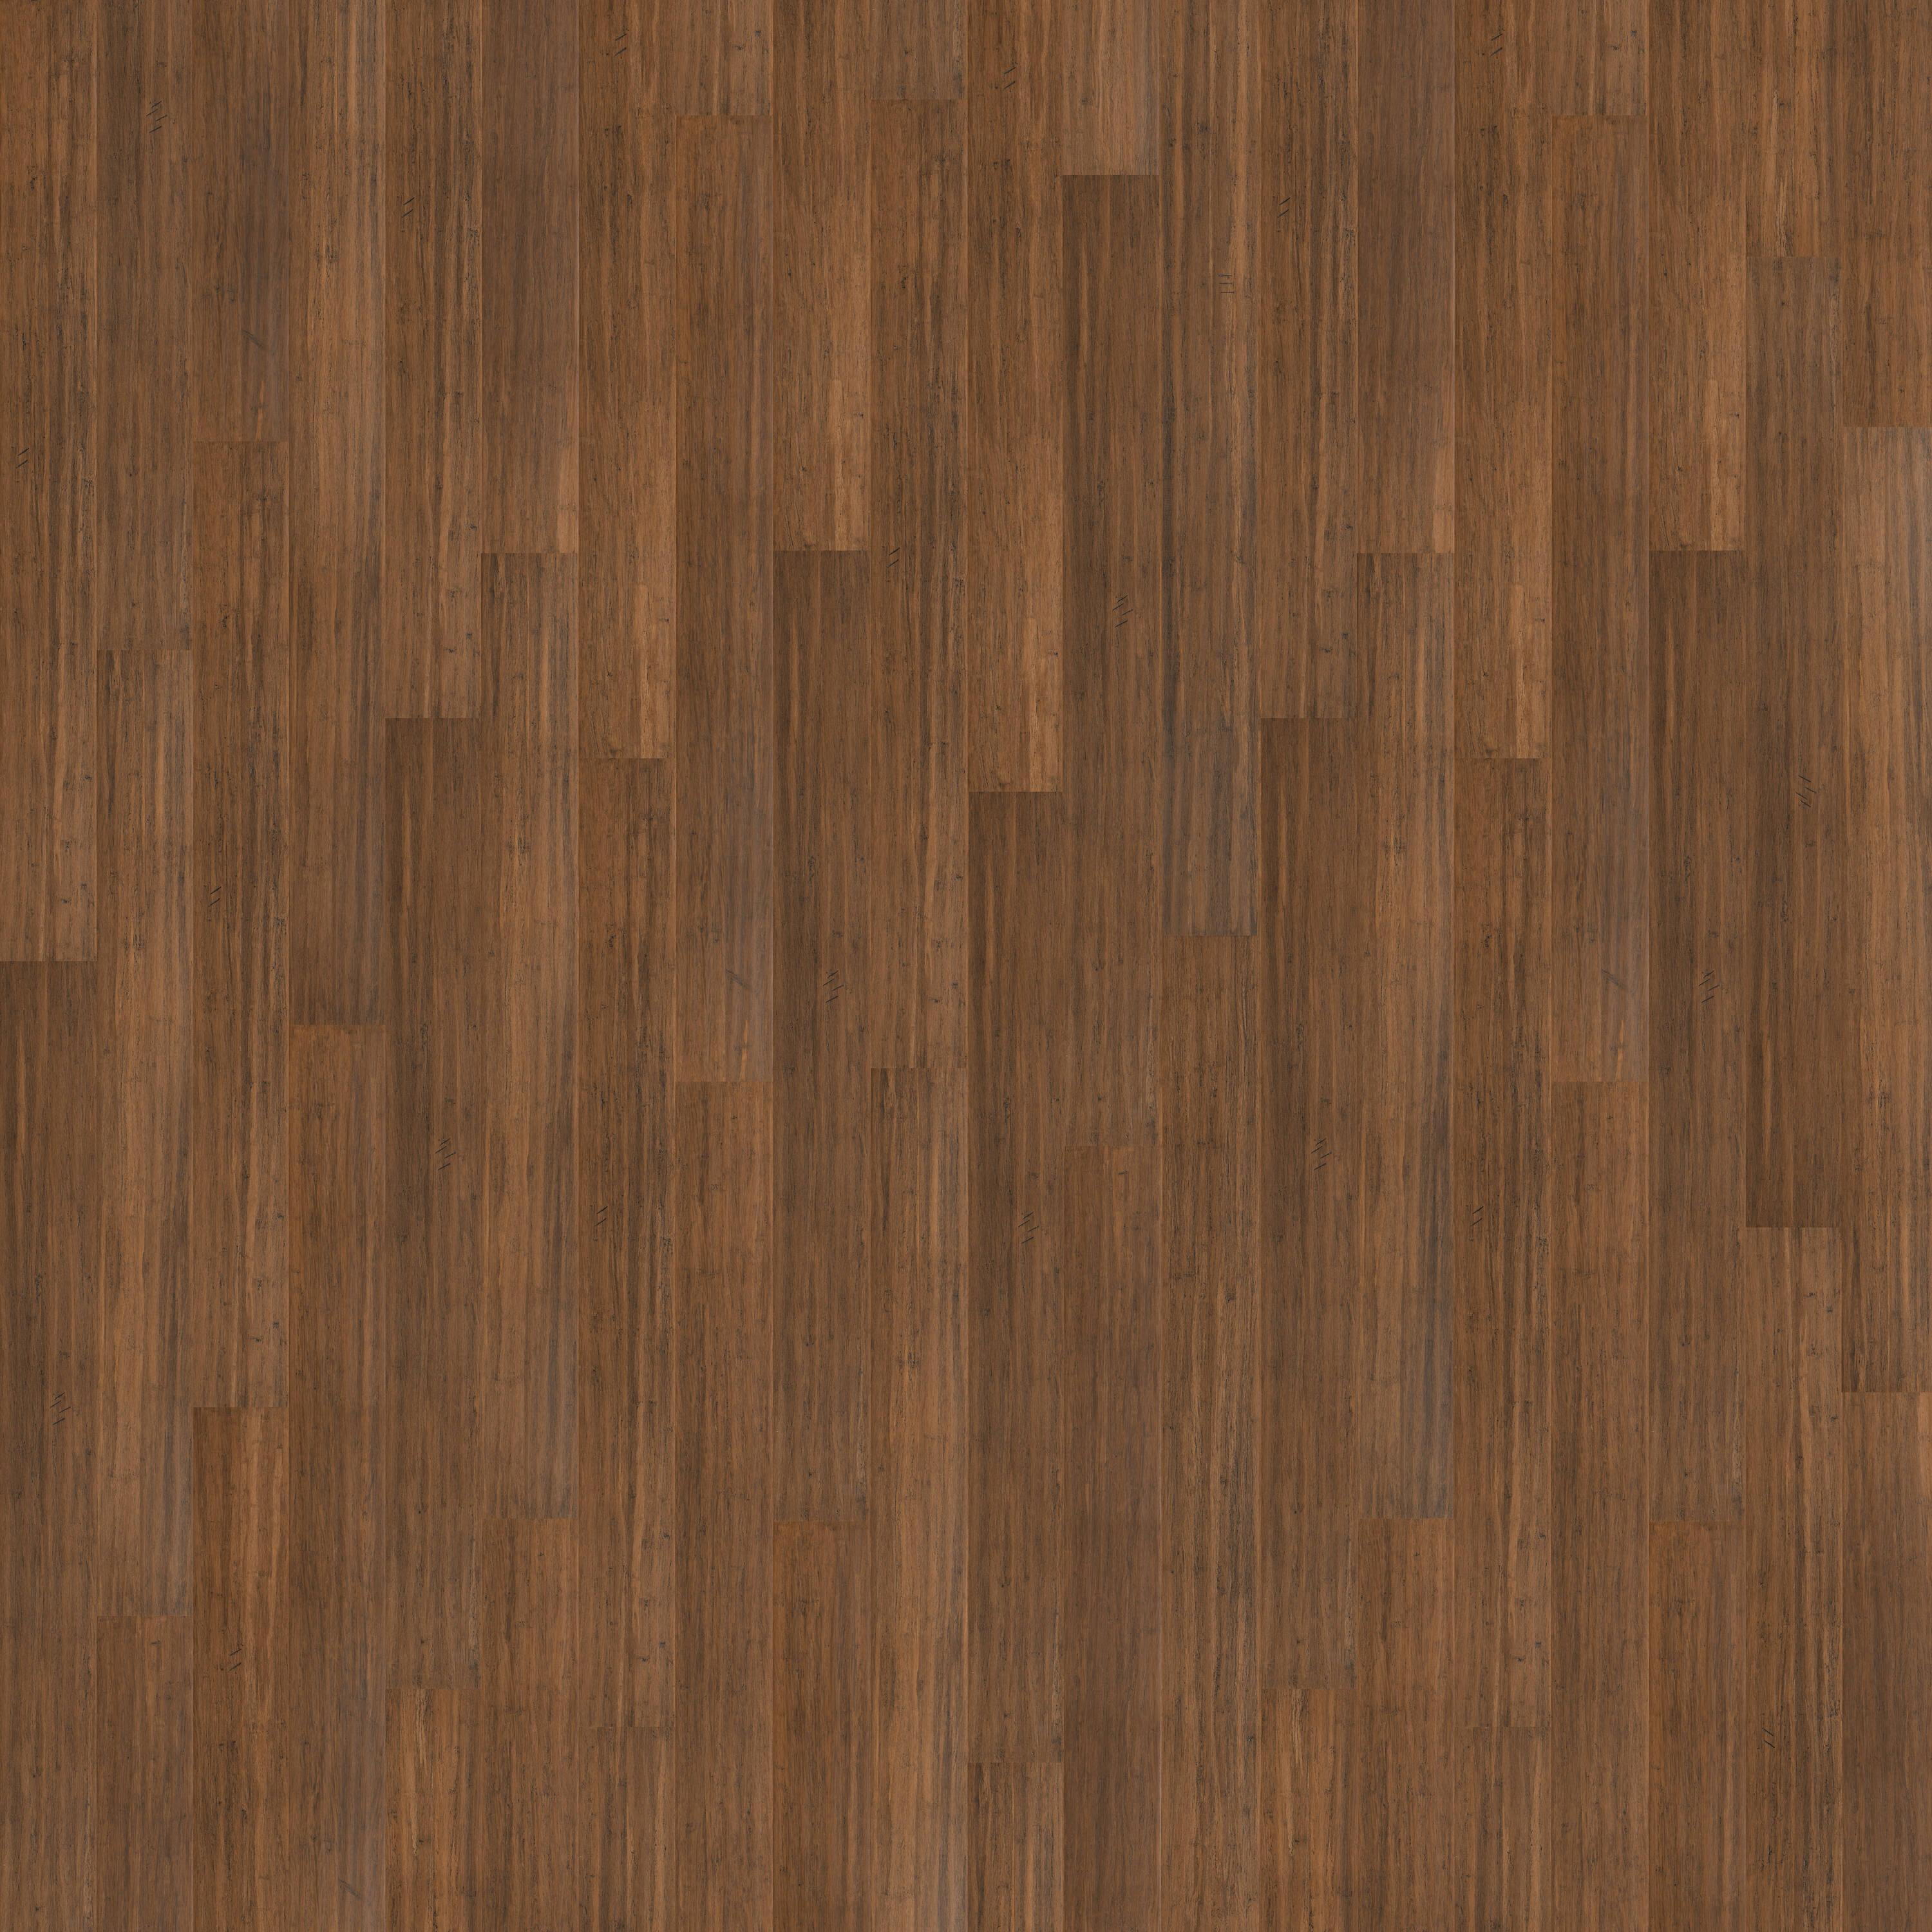 Fossilized Antique Java Bamboo 5-3/8-in W x 9/16-in T x Handscraped Solid Hardwood Flooring (21.5-sq ft) in Brown | - CALI 7003001000